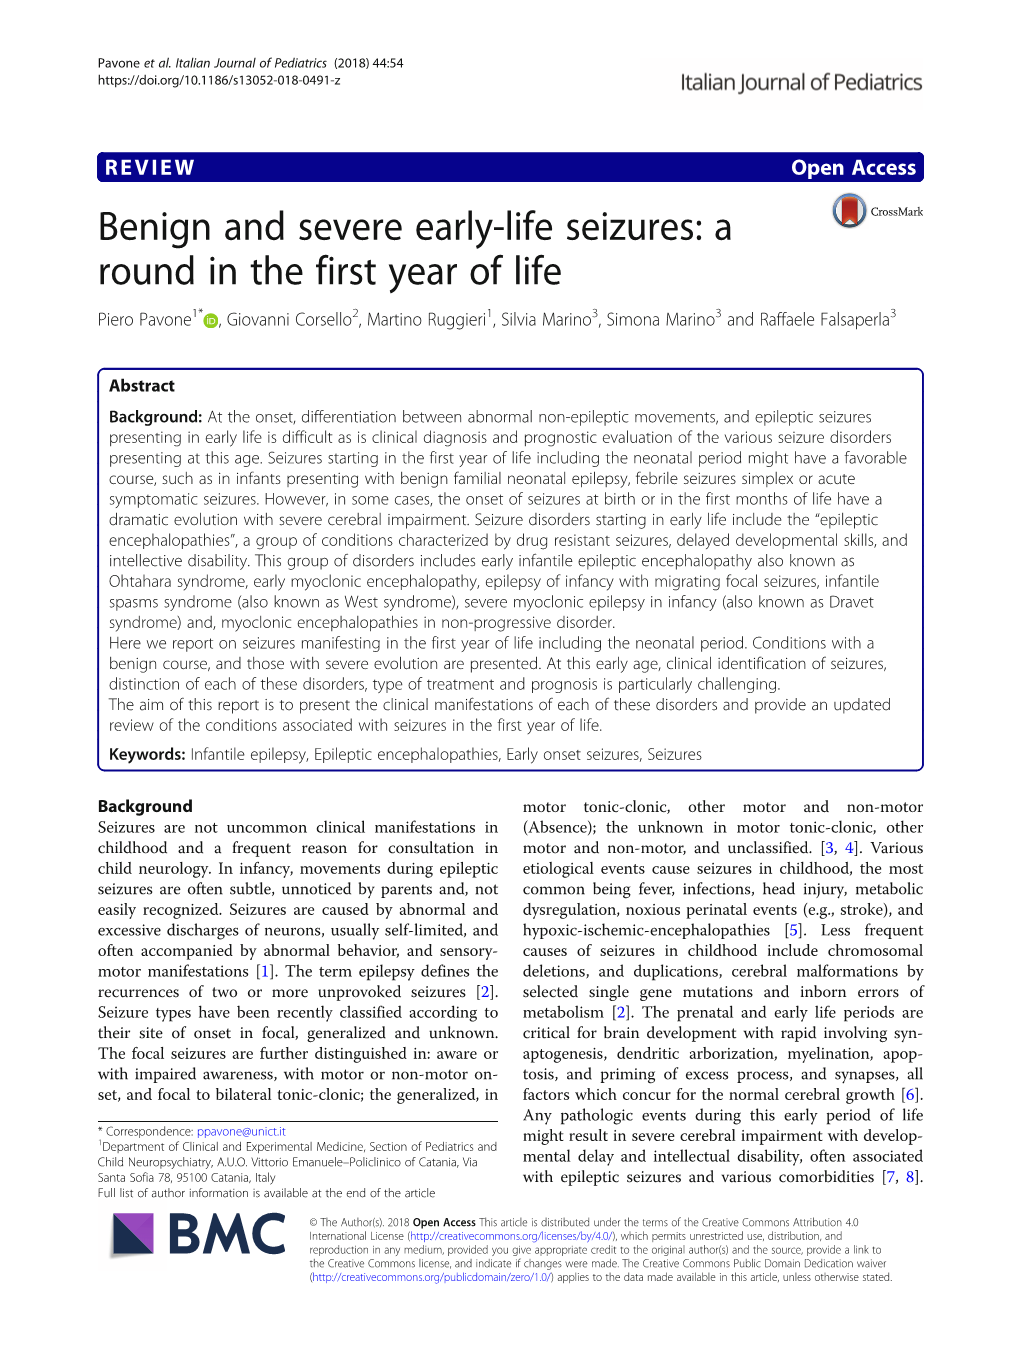 Benign and Severe Early-Life Seizures: a Round in the First Year of Life